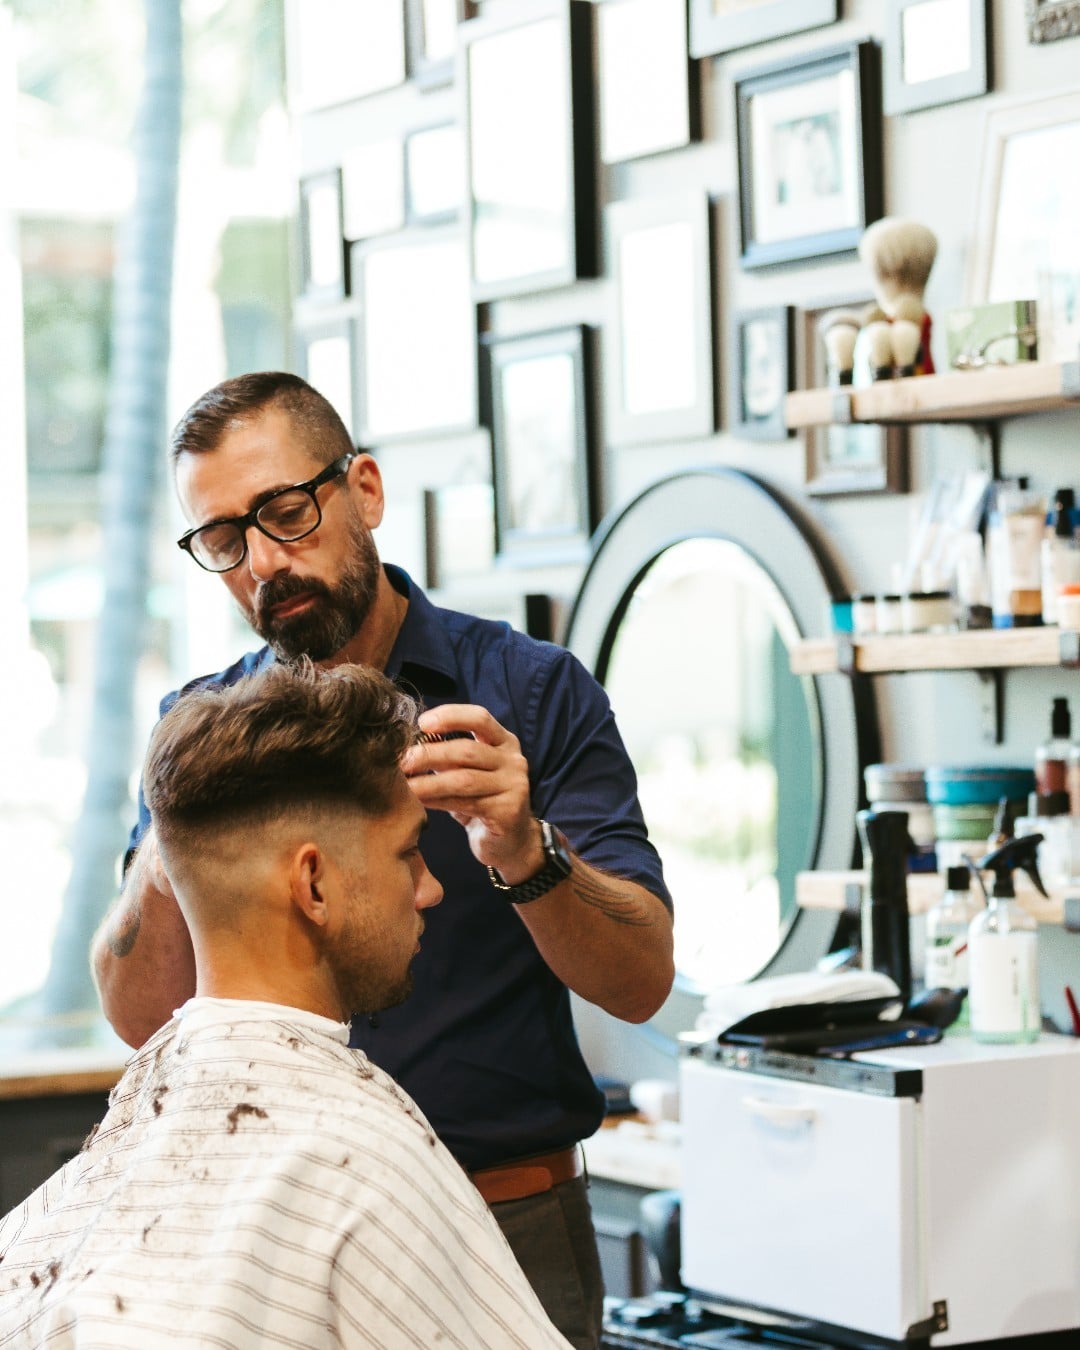 Feel your best going into 2023 by treating yourself to a new haircut from the expert stylists in Ward Village. #wardvillage #2023 #honolulu